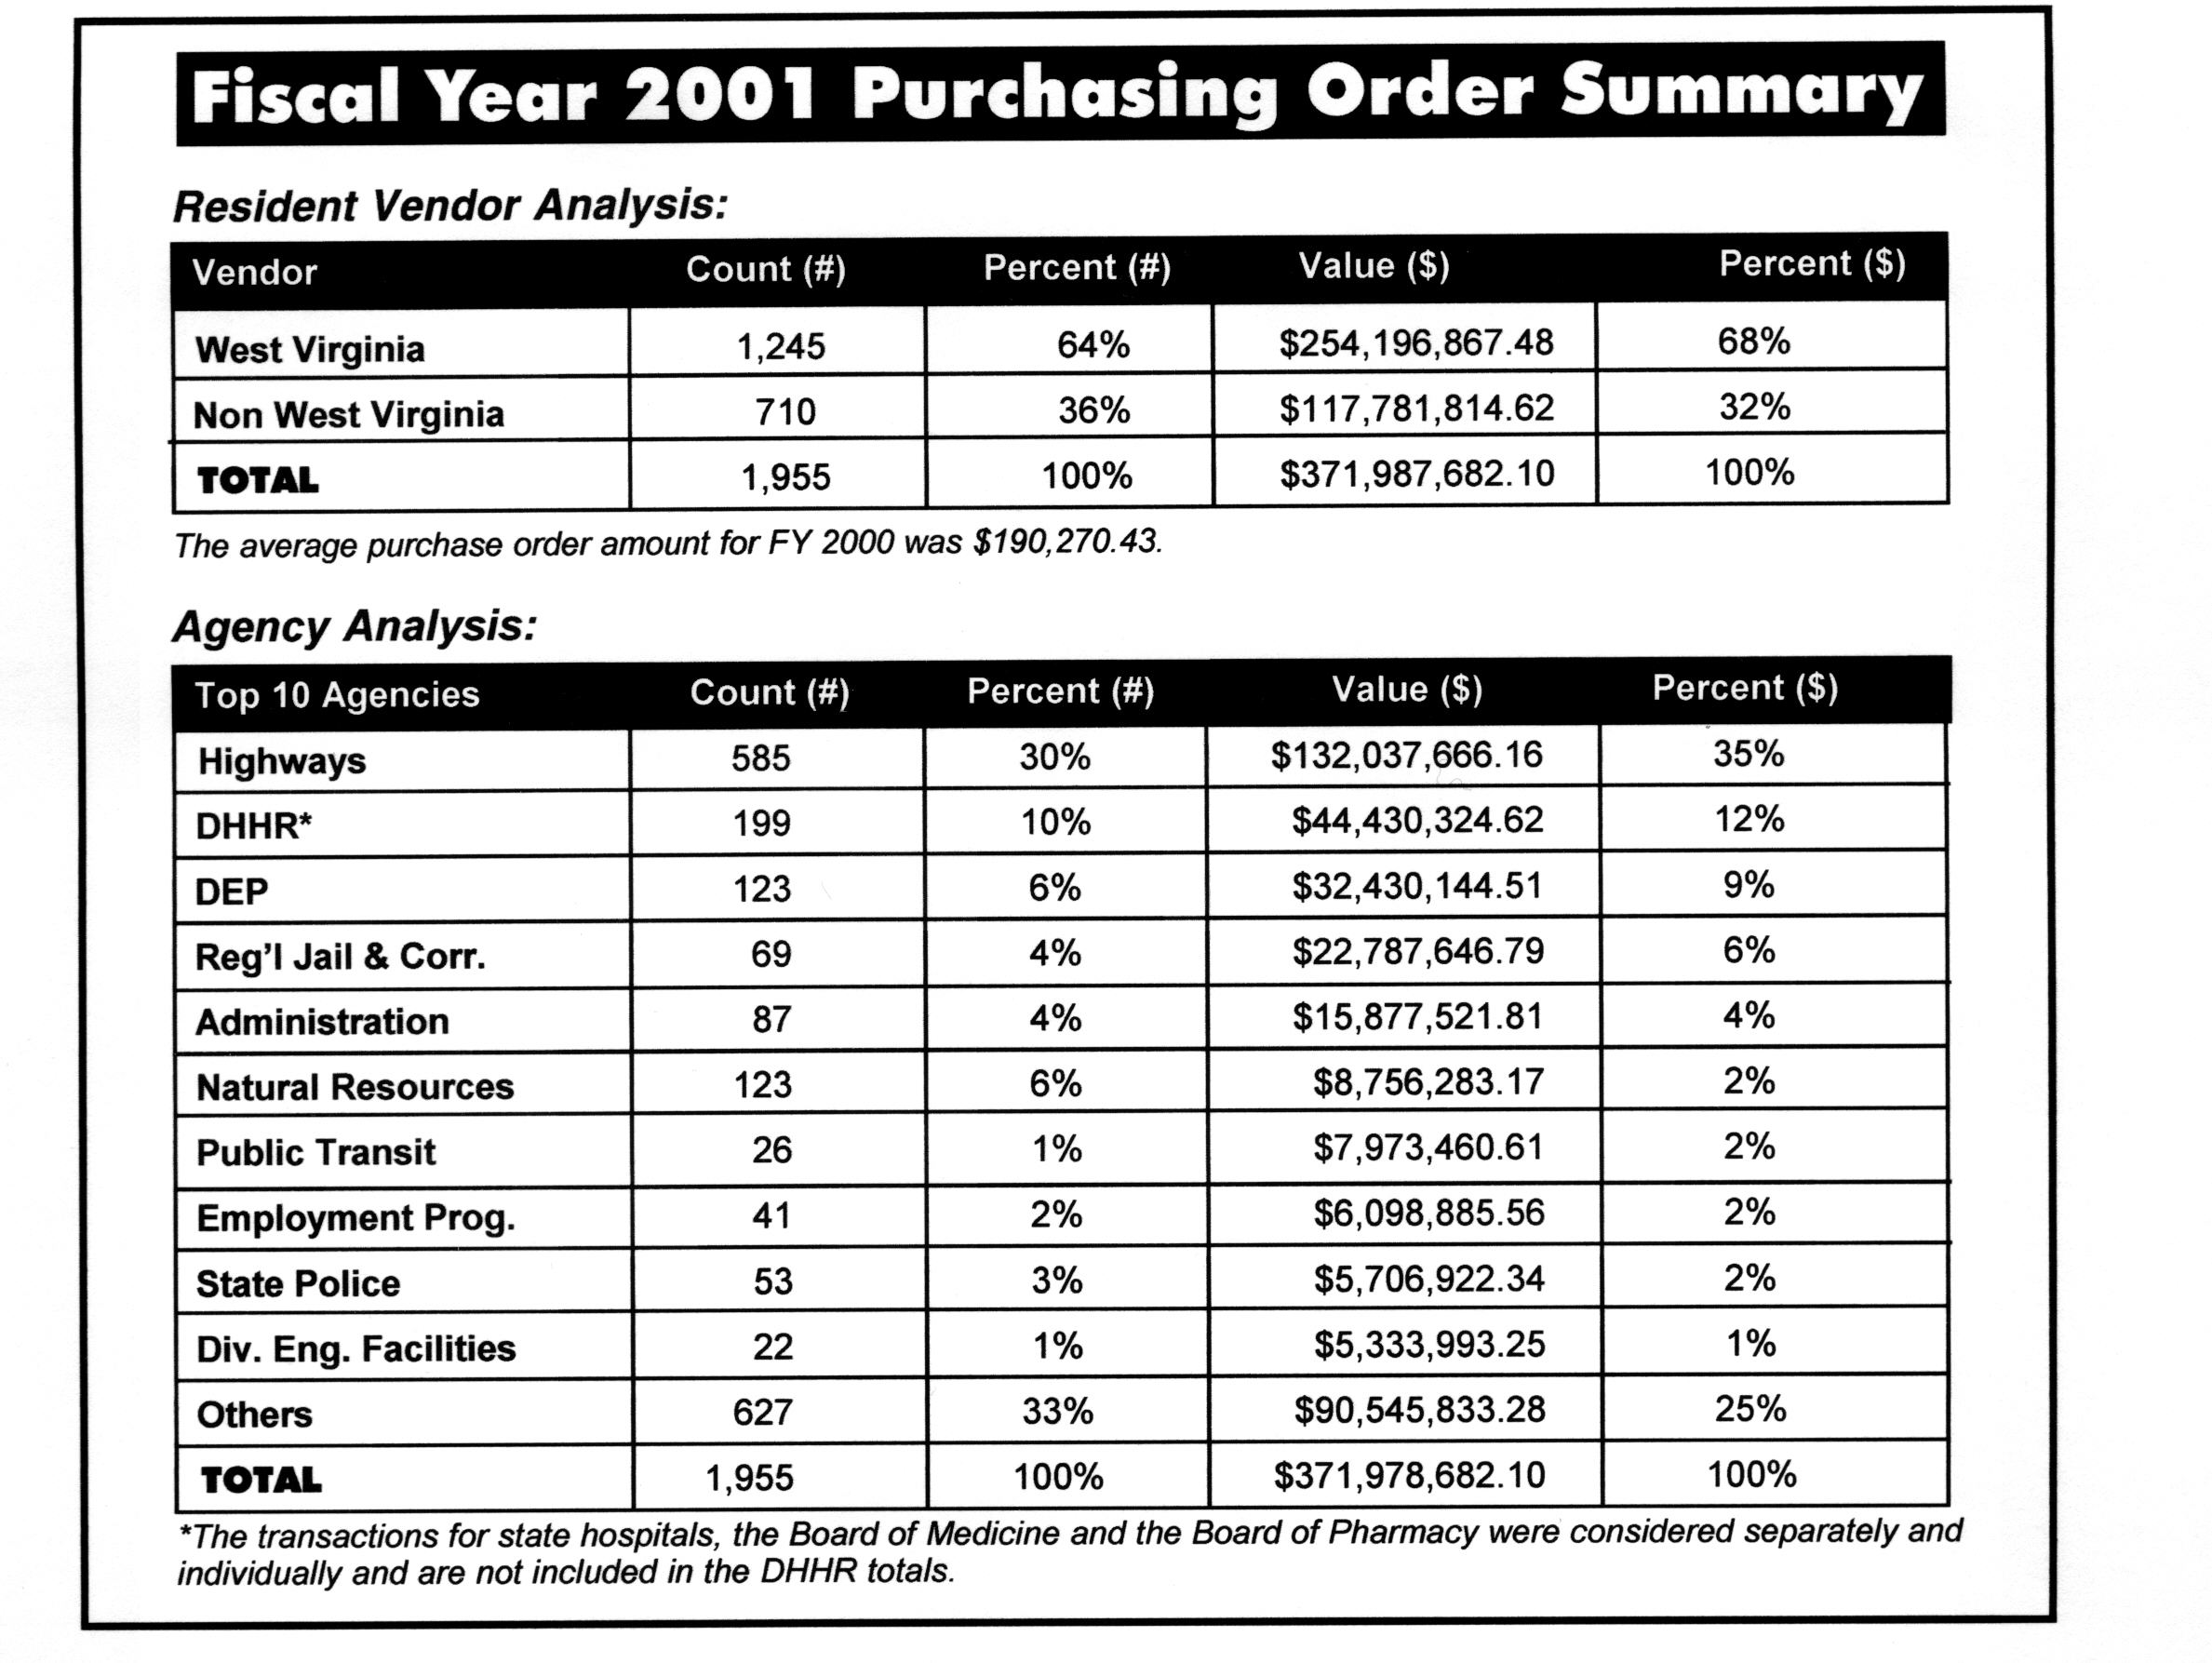 FY 2000 Purchase Order Summary